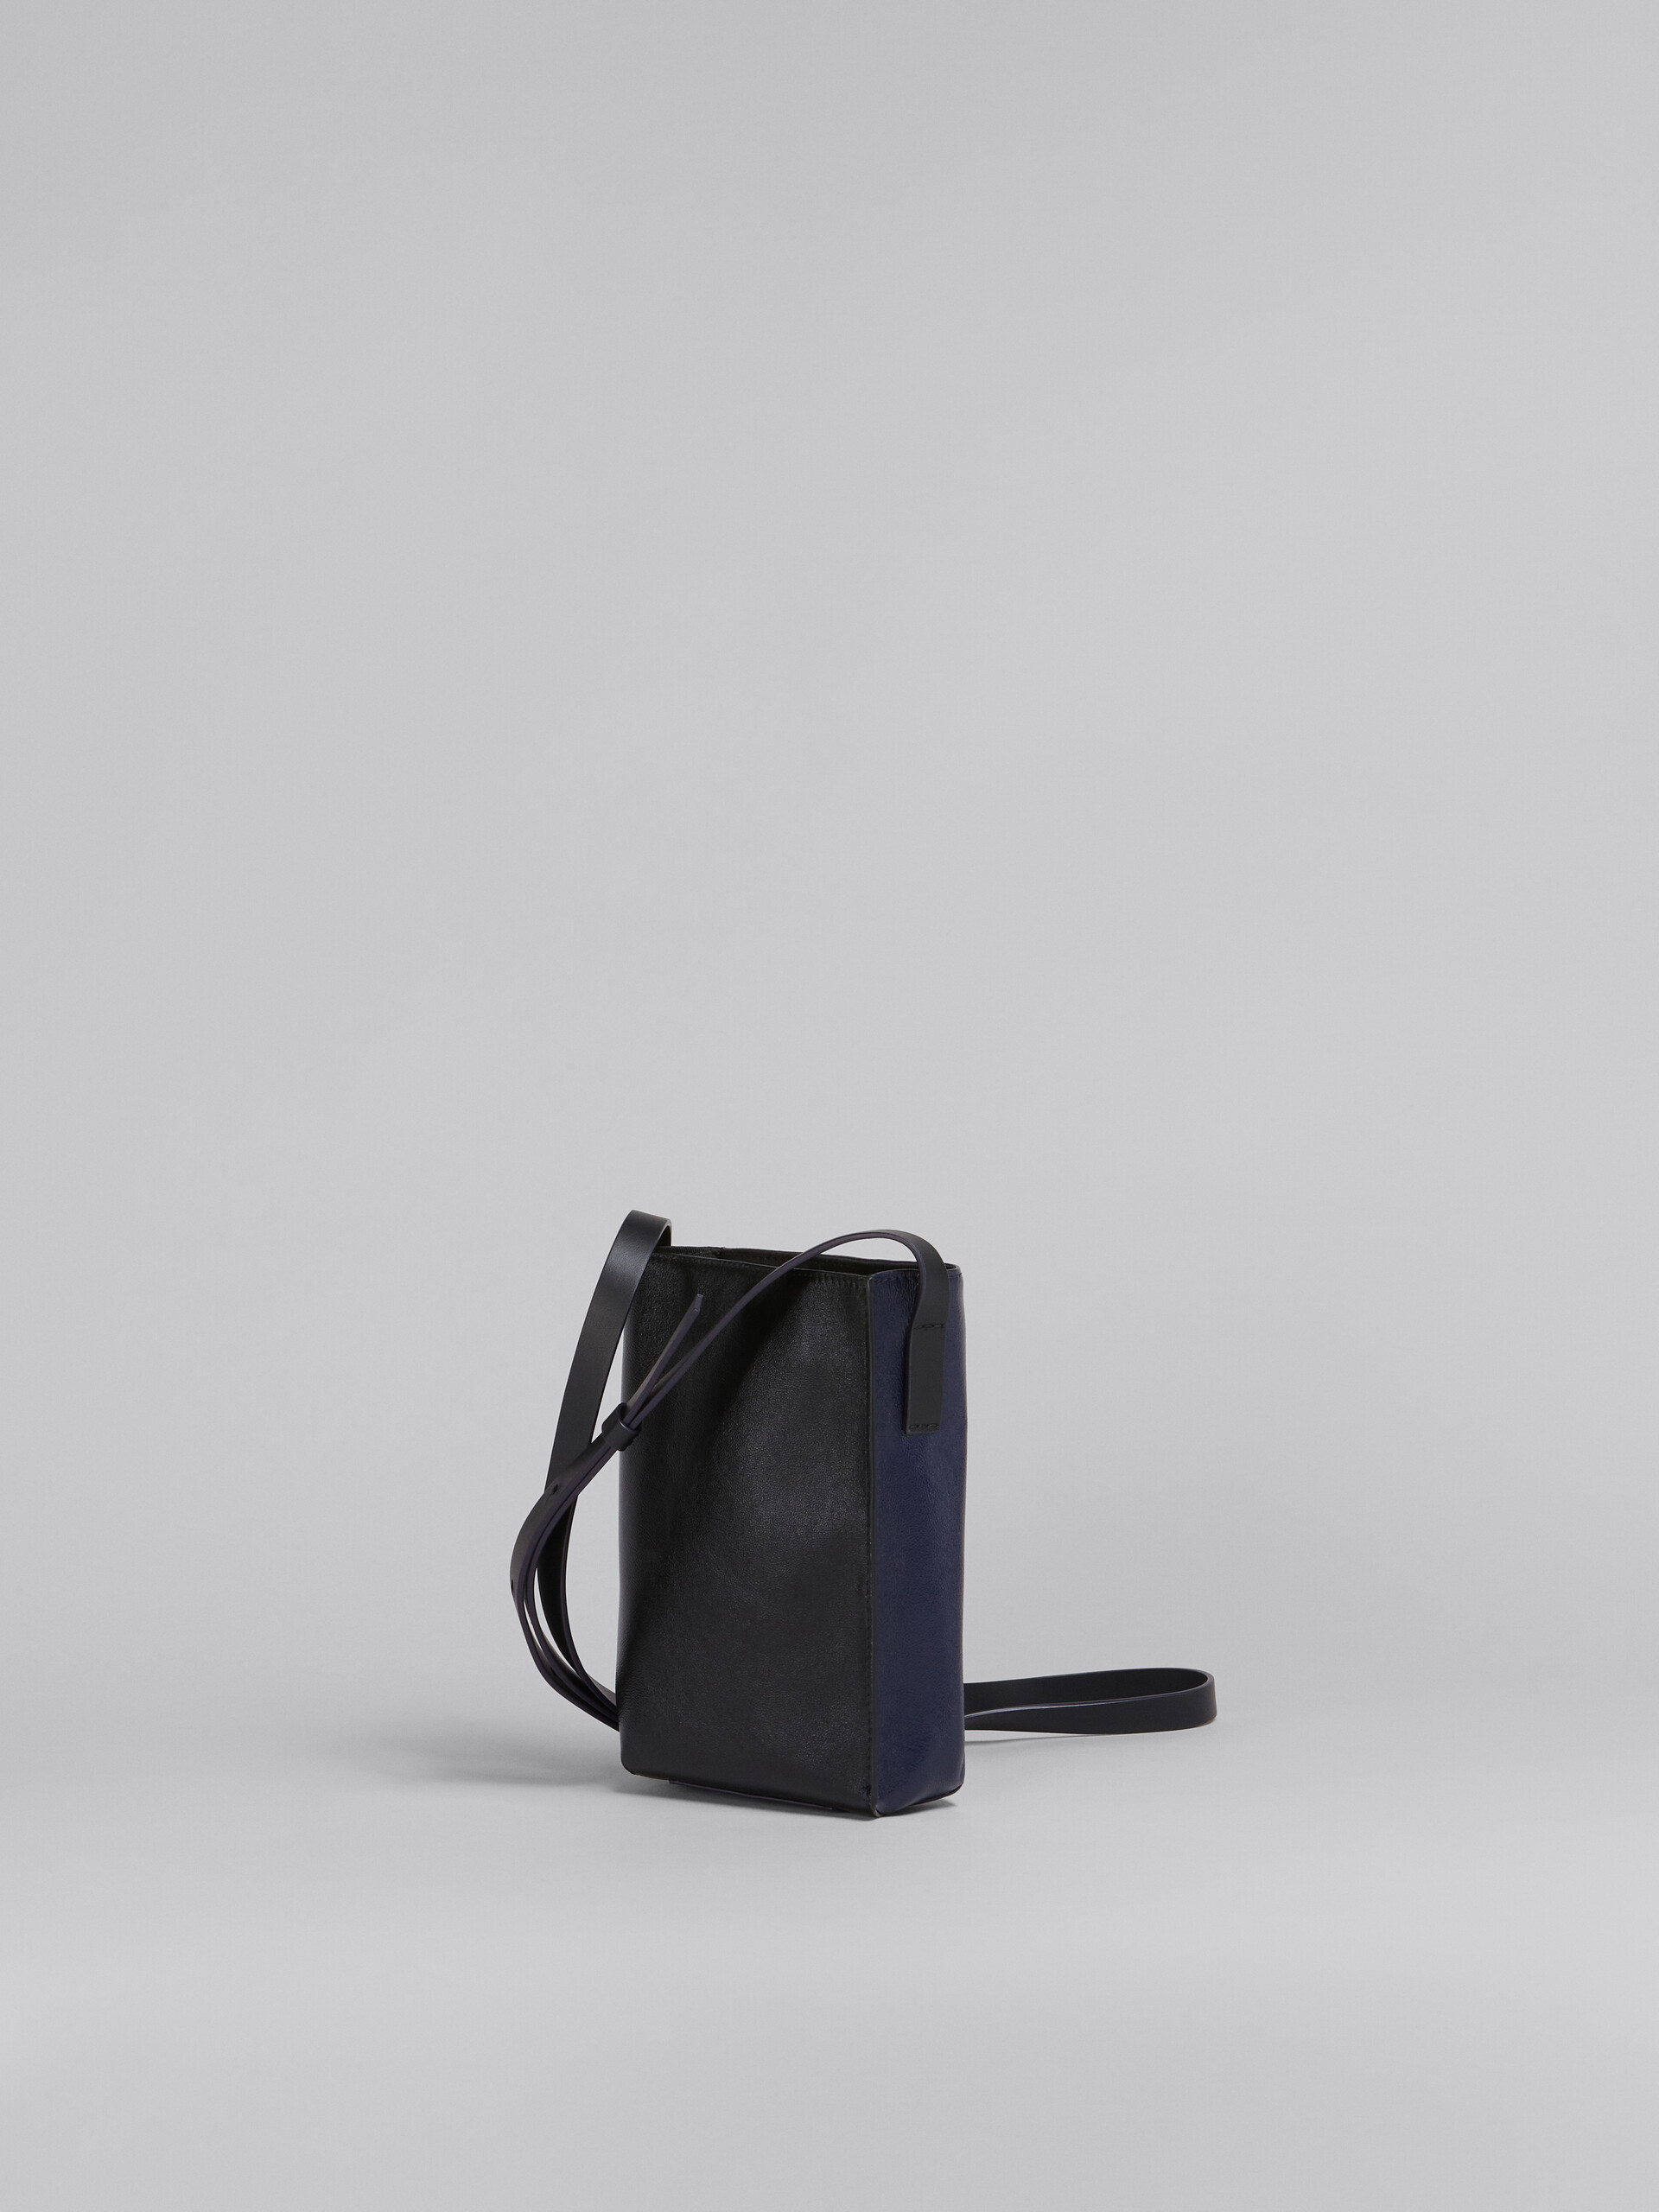 MUSEO SOFT small bag in blue and black shiny leather - Shoulder Bags - Image 3